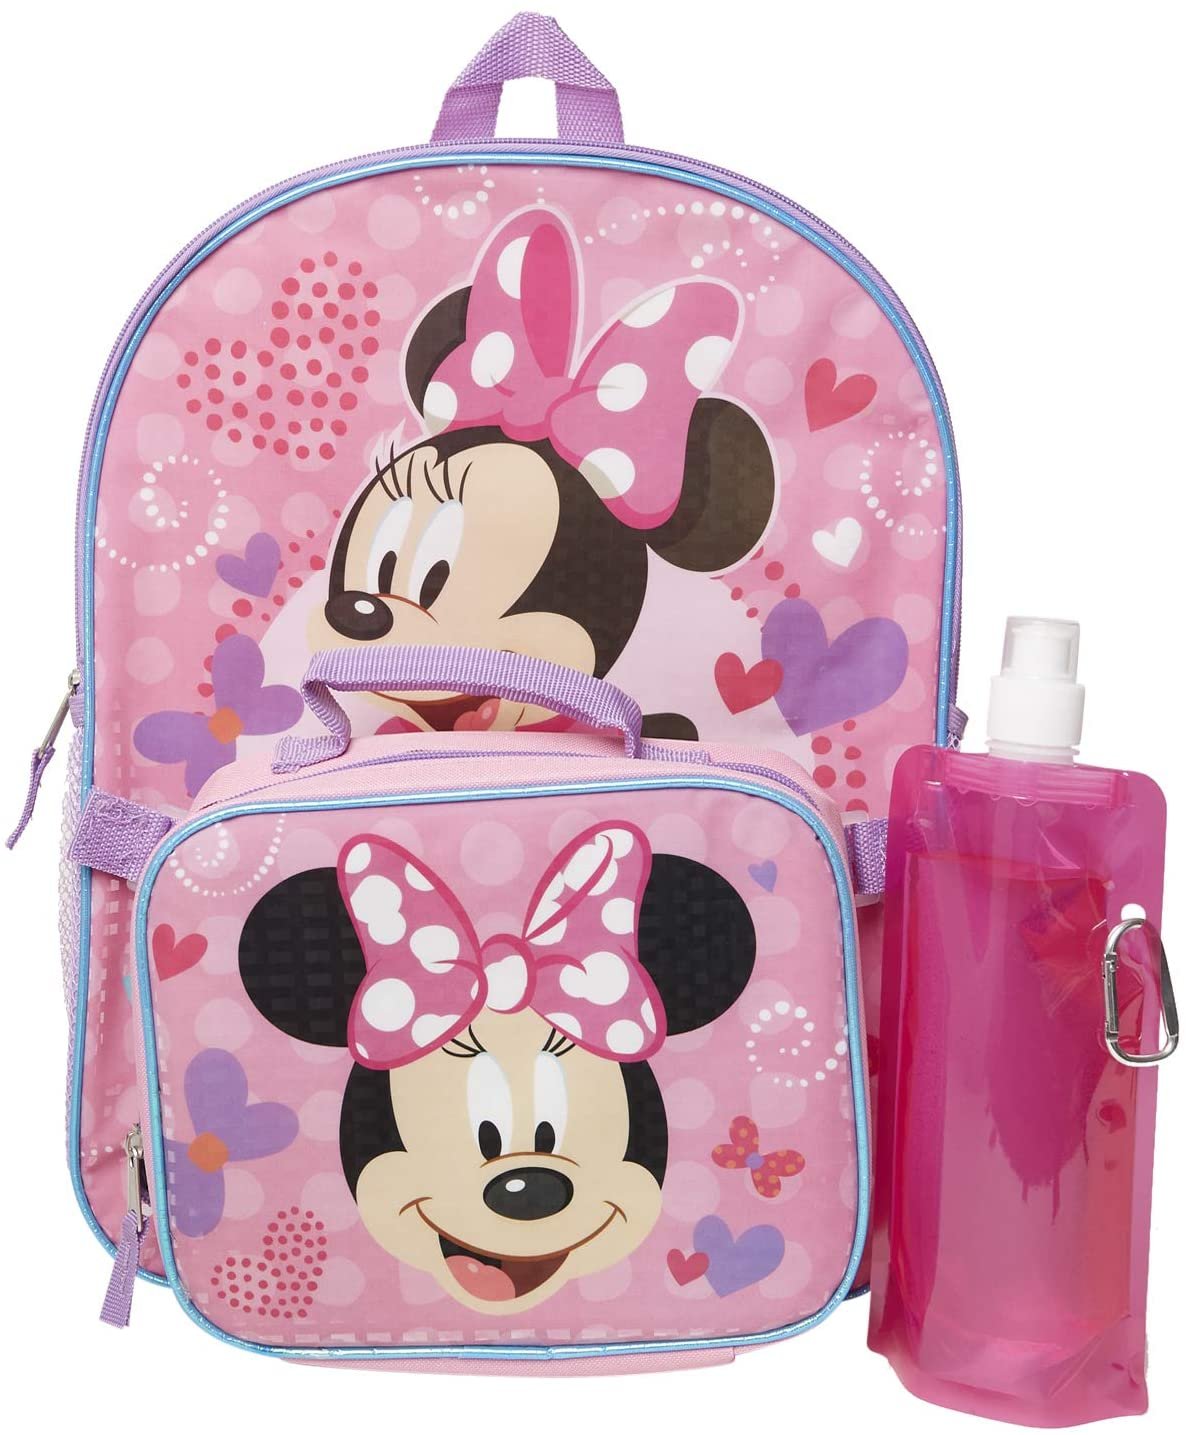 Minnie Mouse Backpack Combo Set - Minnie Mouse Girls 4 Piece Backpack Set - Backpack, Lunch Box, Water Bottle And Carabina Minnie Mouse 4Pc - image 1 of 7